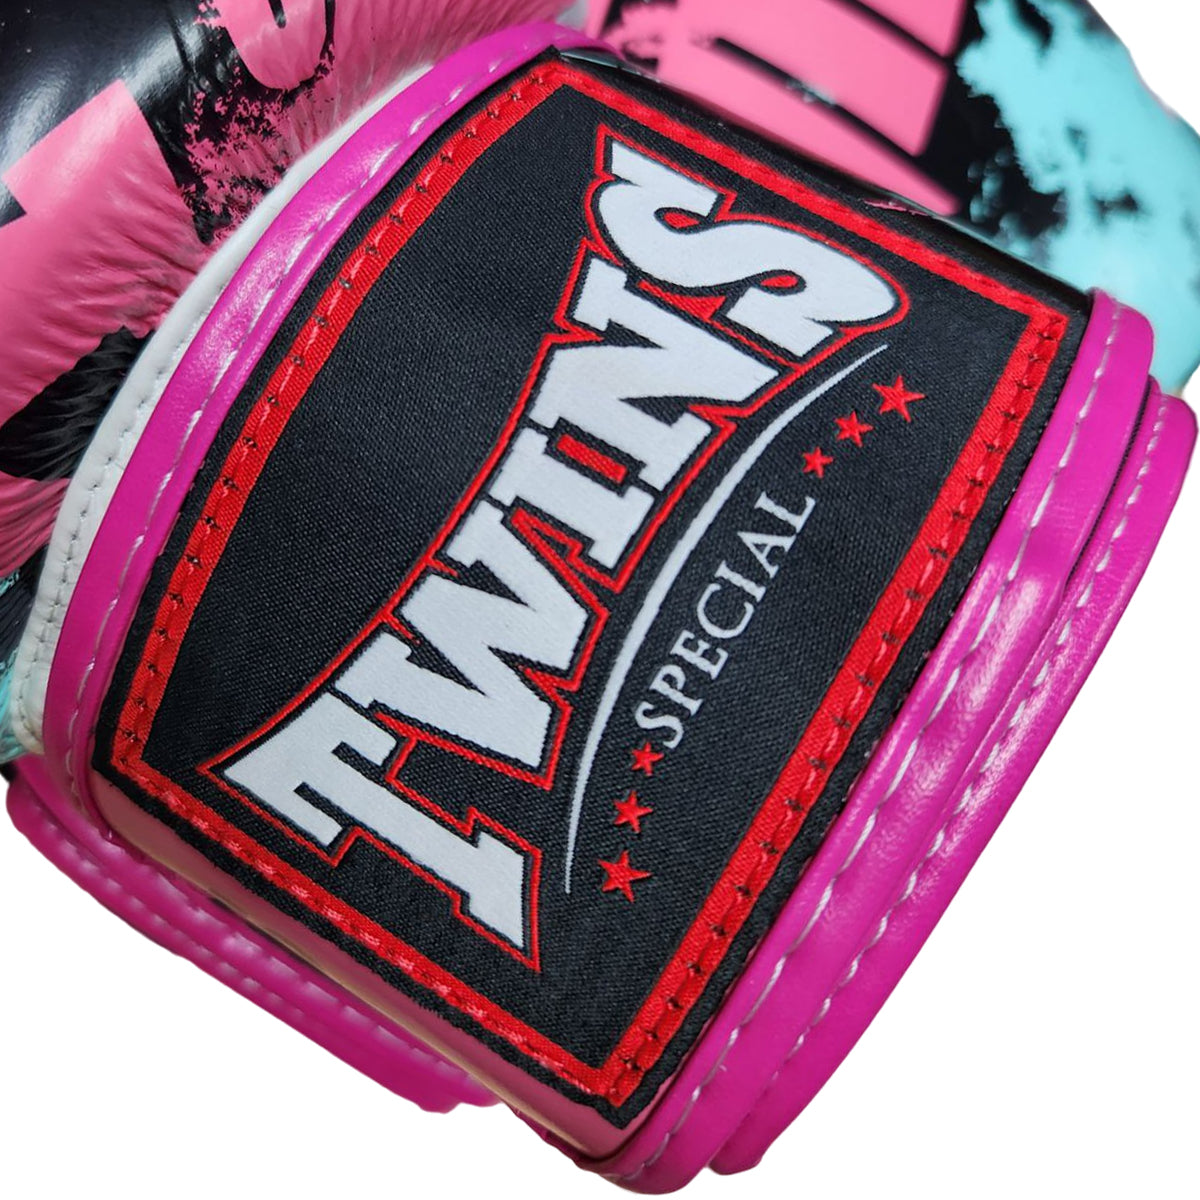 Boxing Gloves Twins Special FBGV-61 Candy Fancy